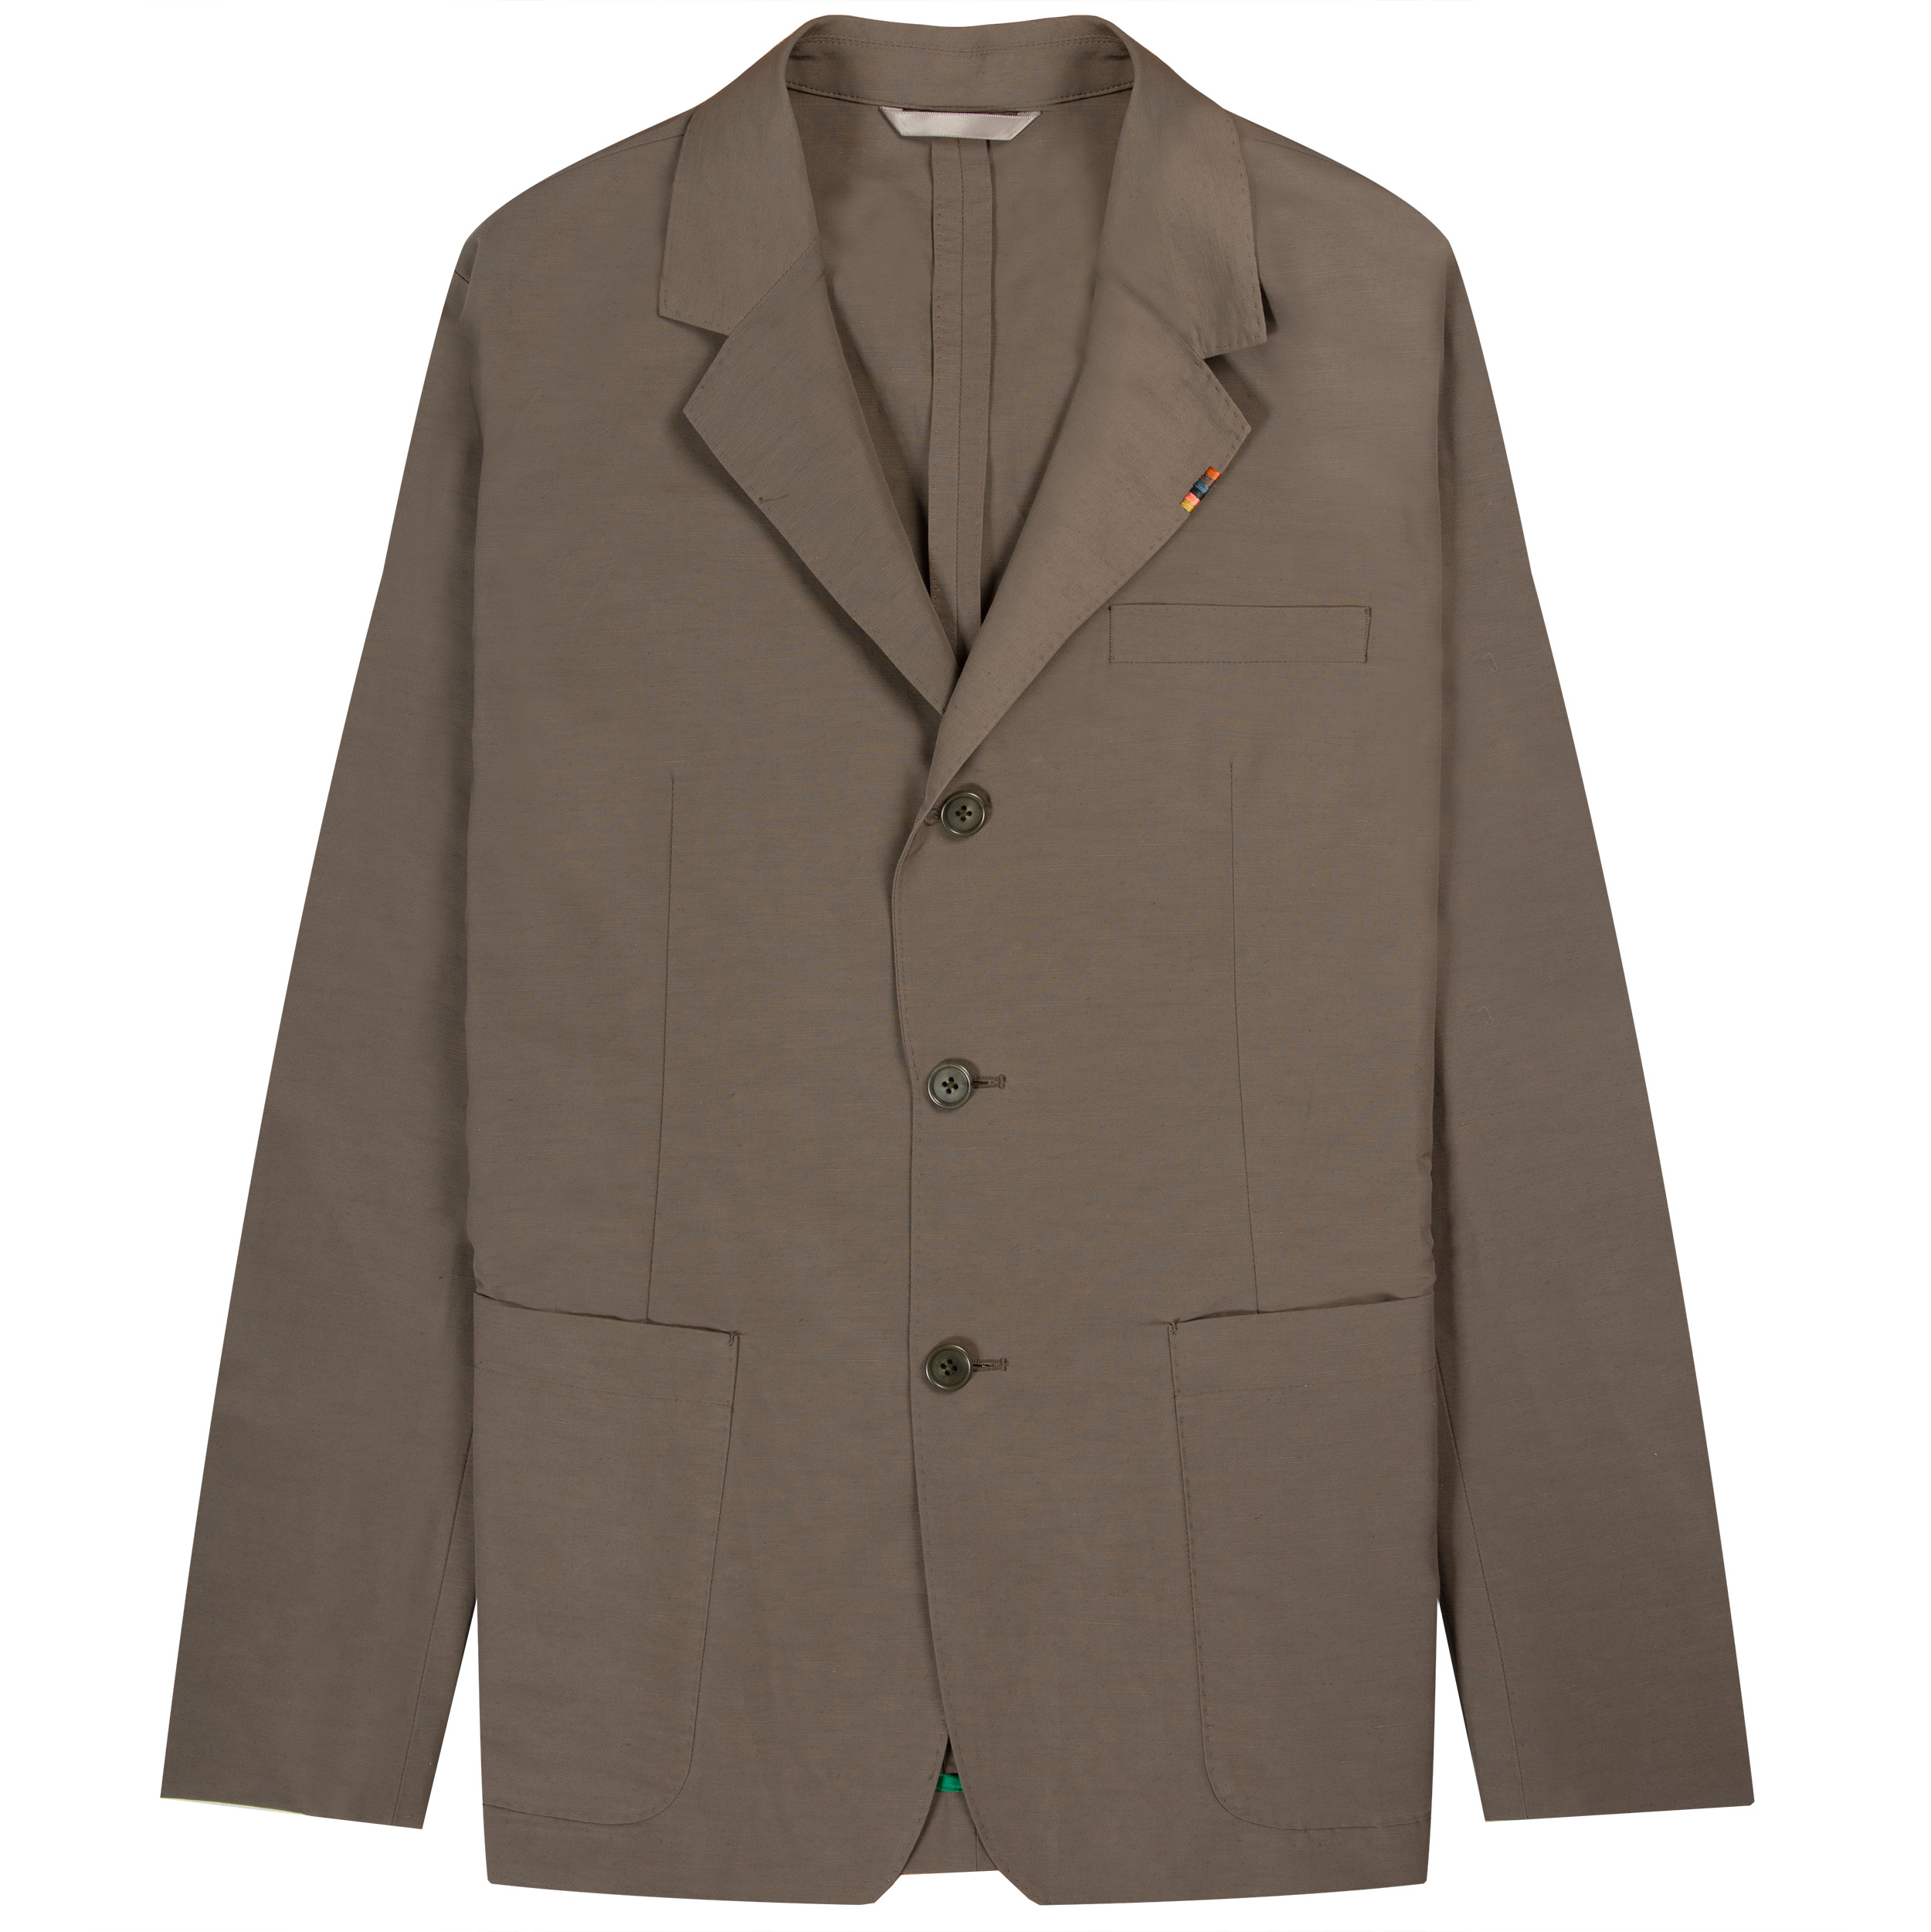 Paul Smith 3 Button Single Breasted Blazer Military Green